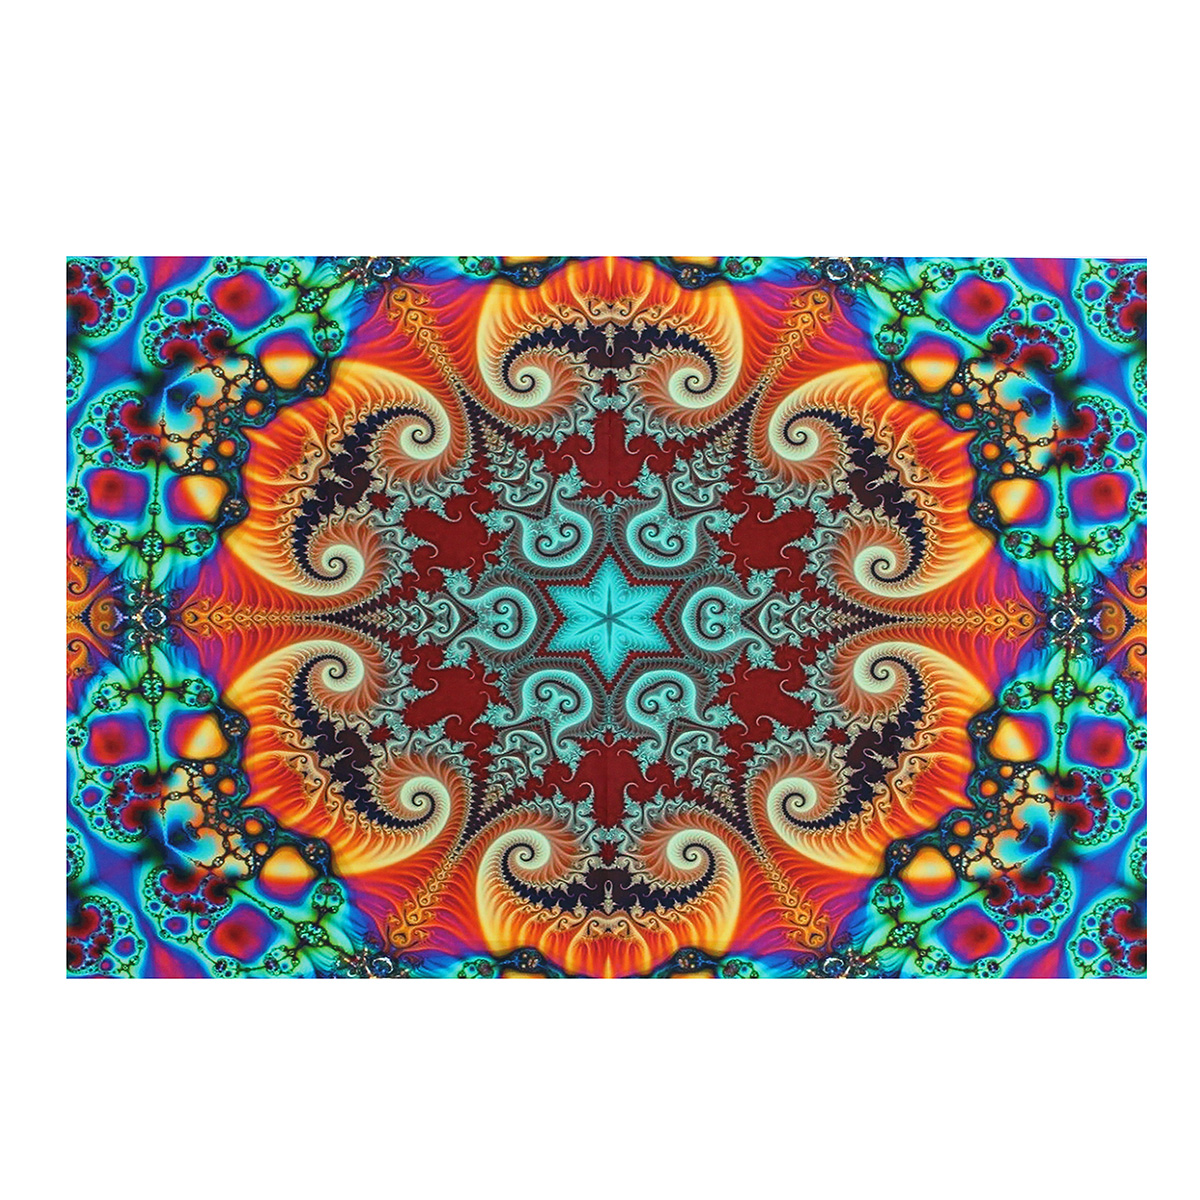 24x36-Inches-Visual-Puzzle-Silk-Poster-Psychedelic-Puzzle-Magic-Wall-Art-Home-Decor-1097062